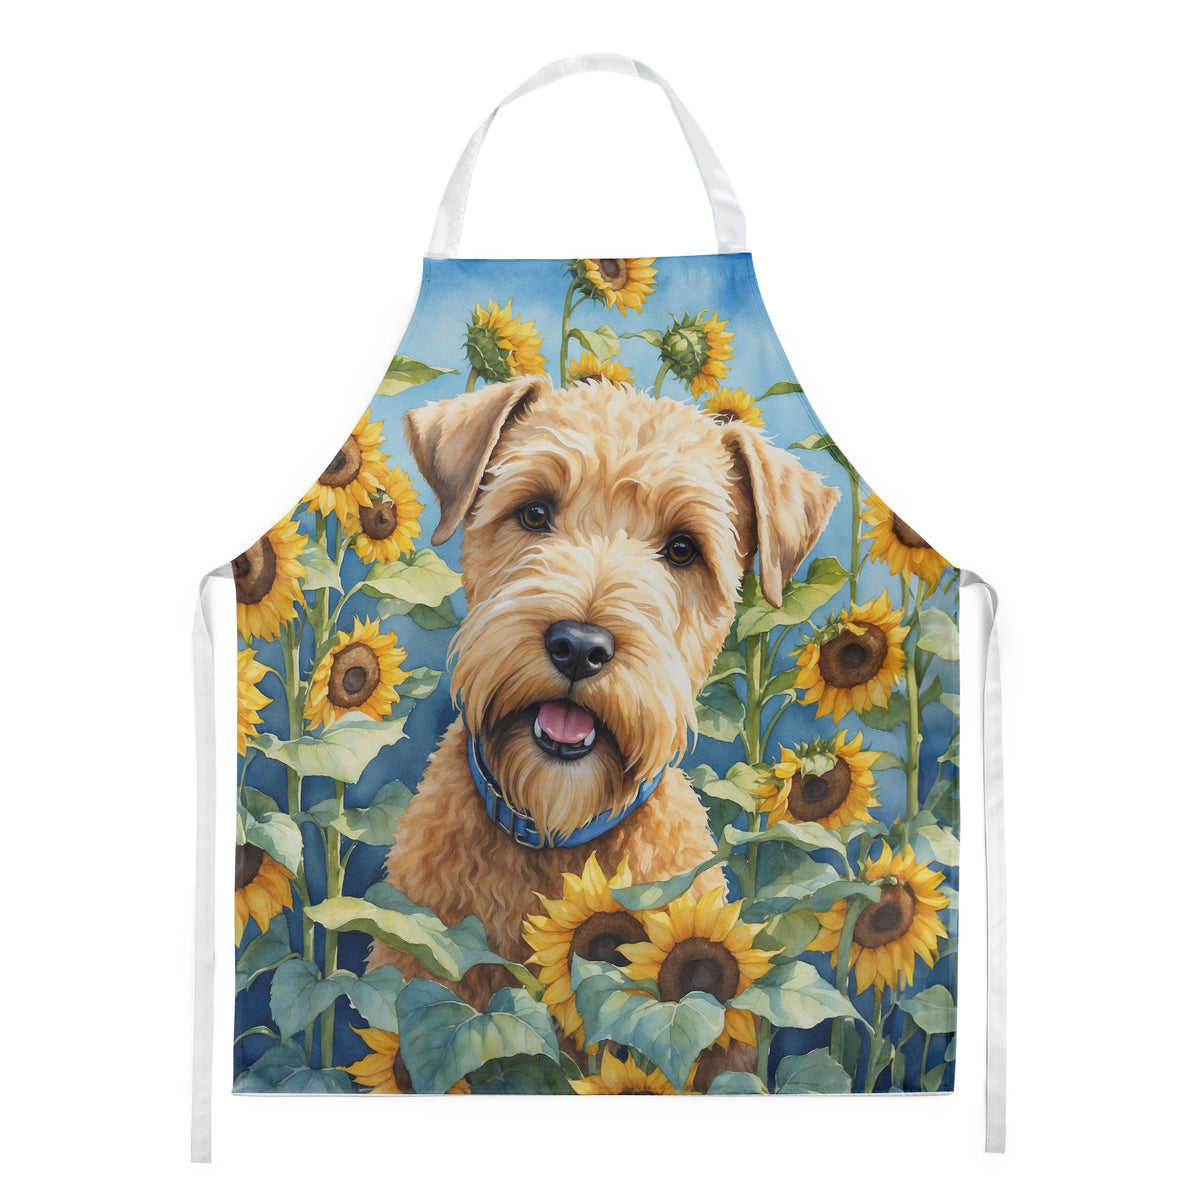 Buy this Wheaten Terrier in Sunflowers Apron